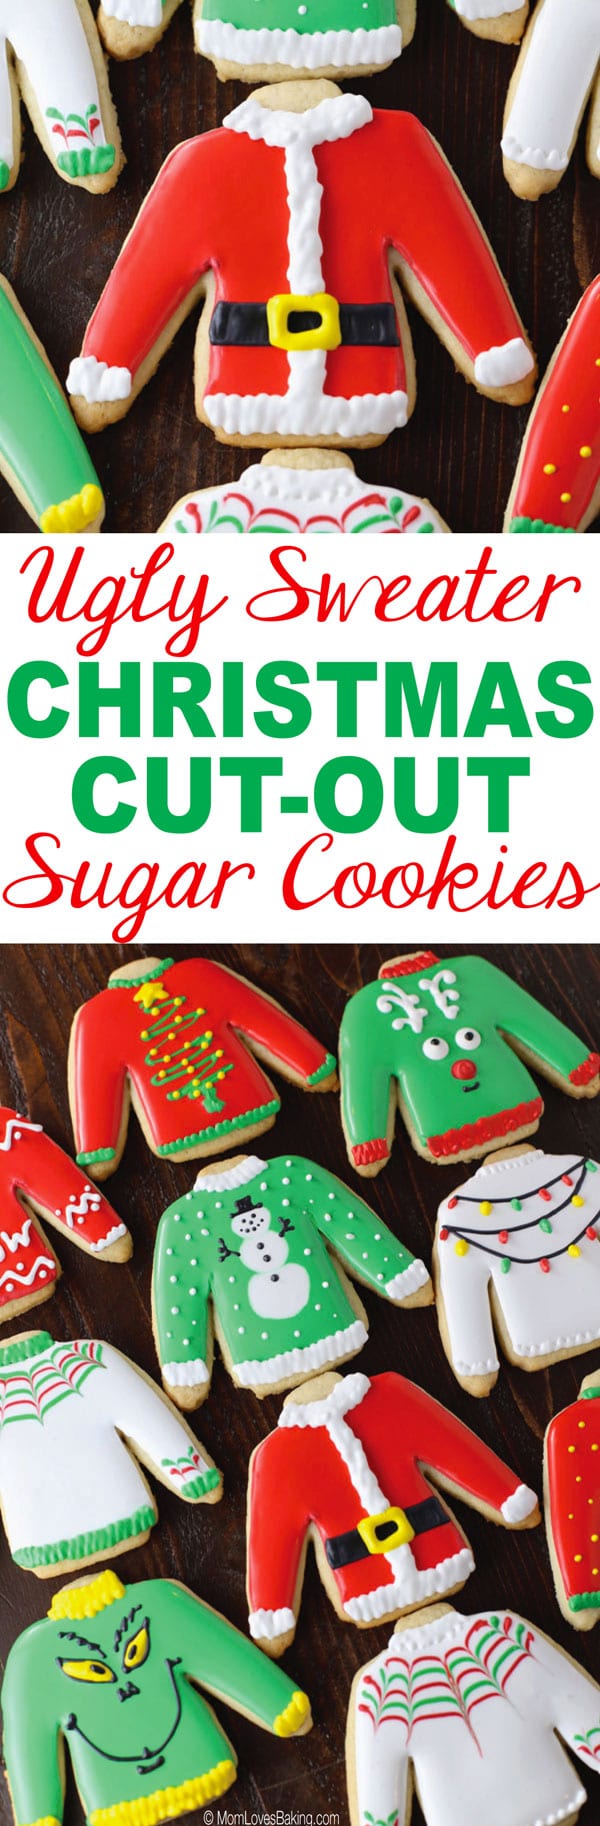 Ugly Sweater Christmas Cut-Out Sugar Cookies